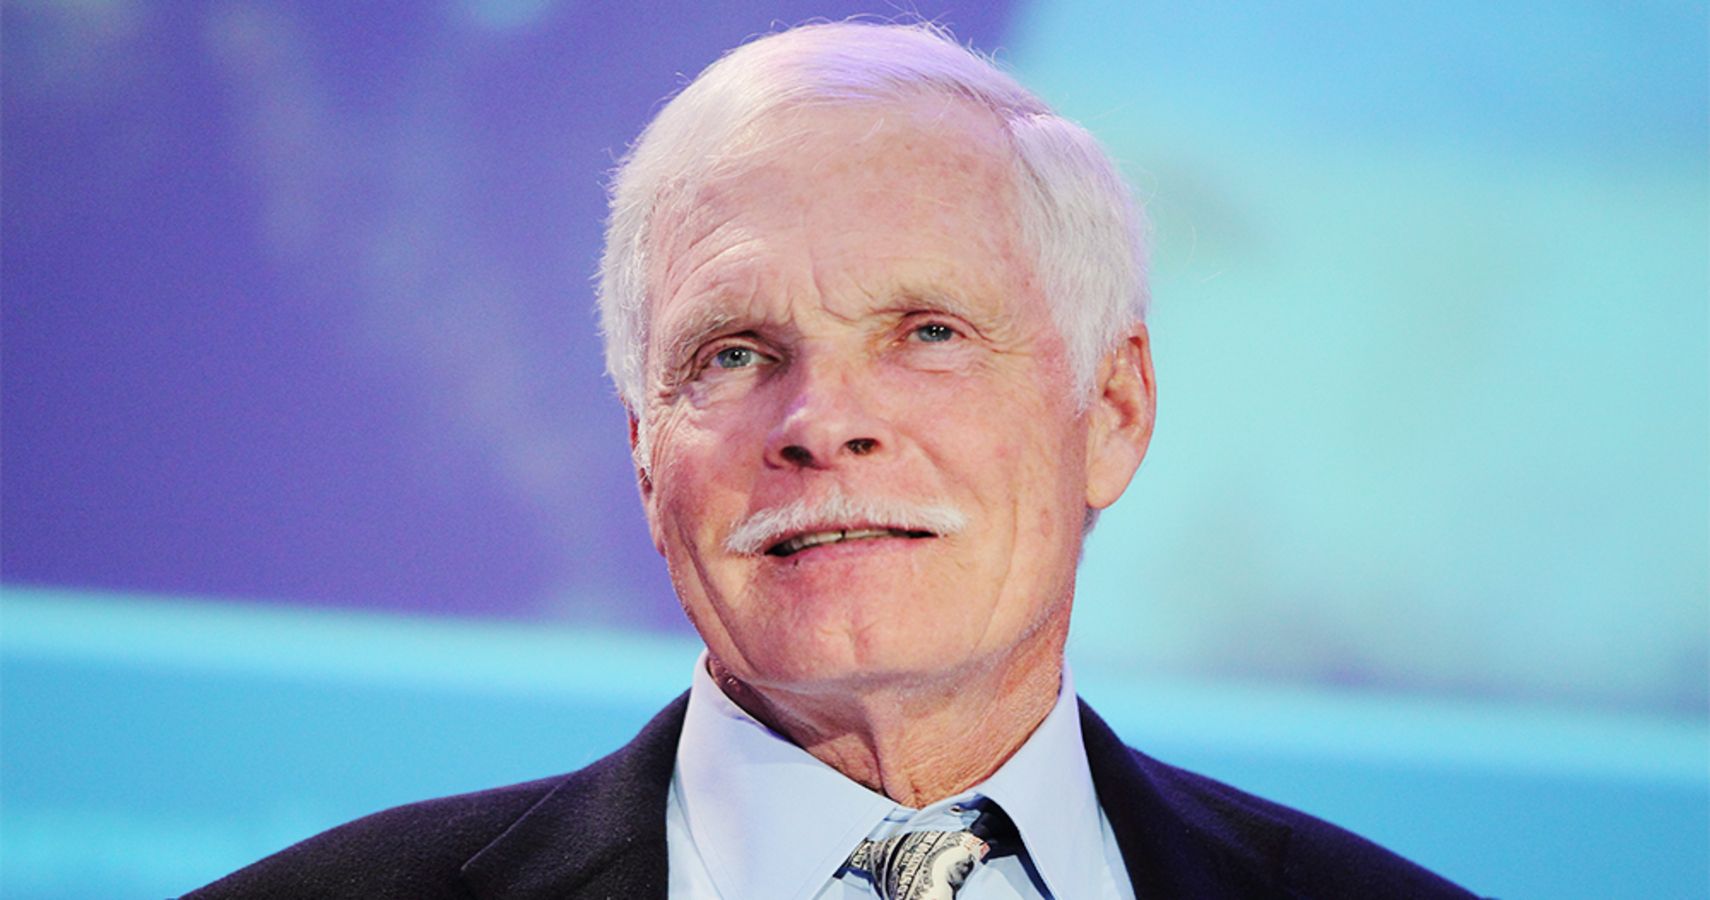 Former WCW Owner Ted Turner Diagnosed With Lewy Body Dementia